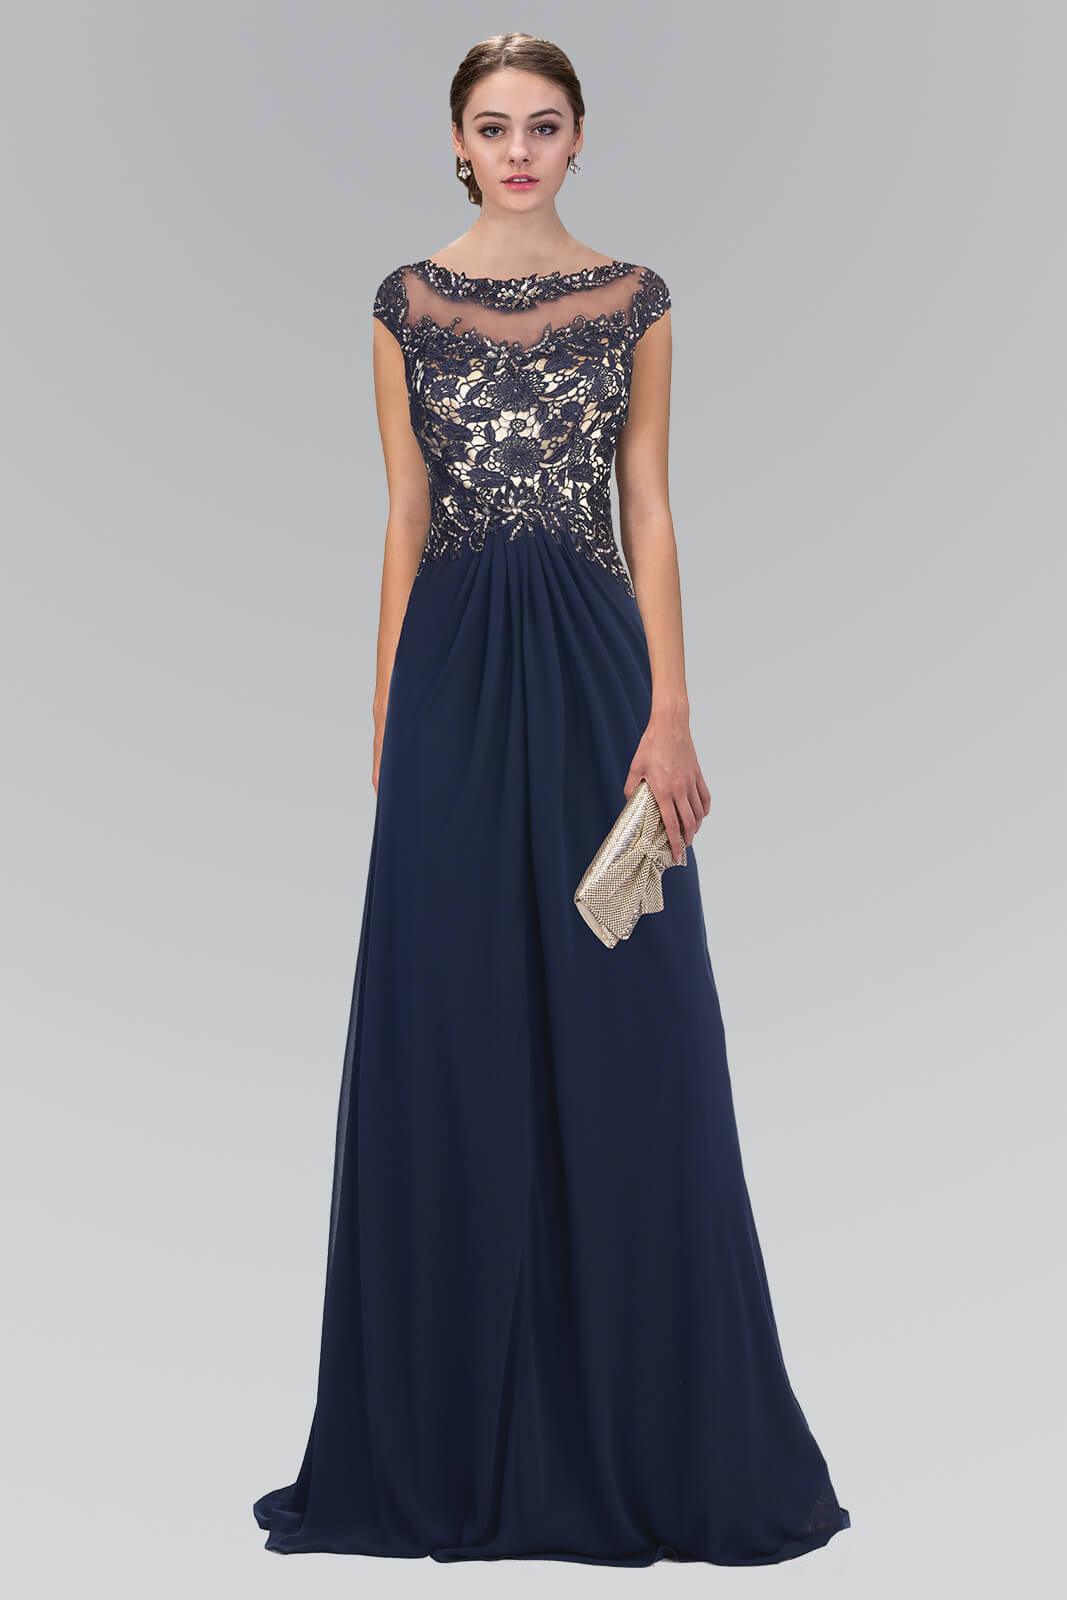 Long Prom Dress Formal Evening Gown for $112.99 – The Dress Outlet